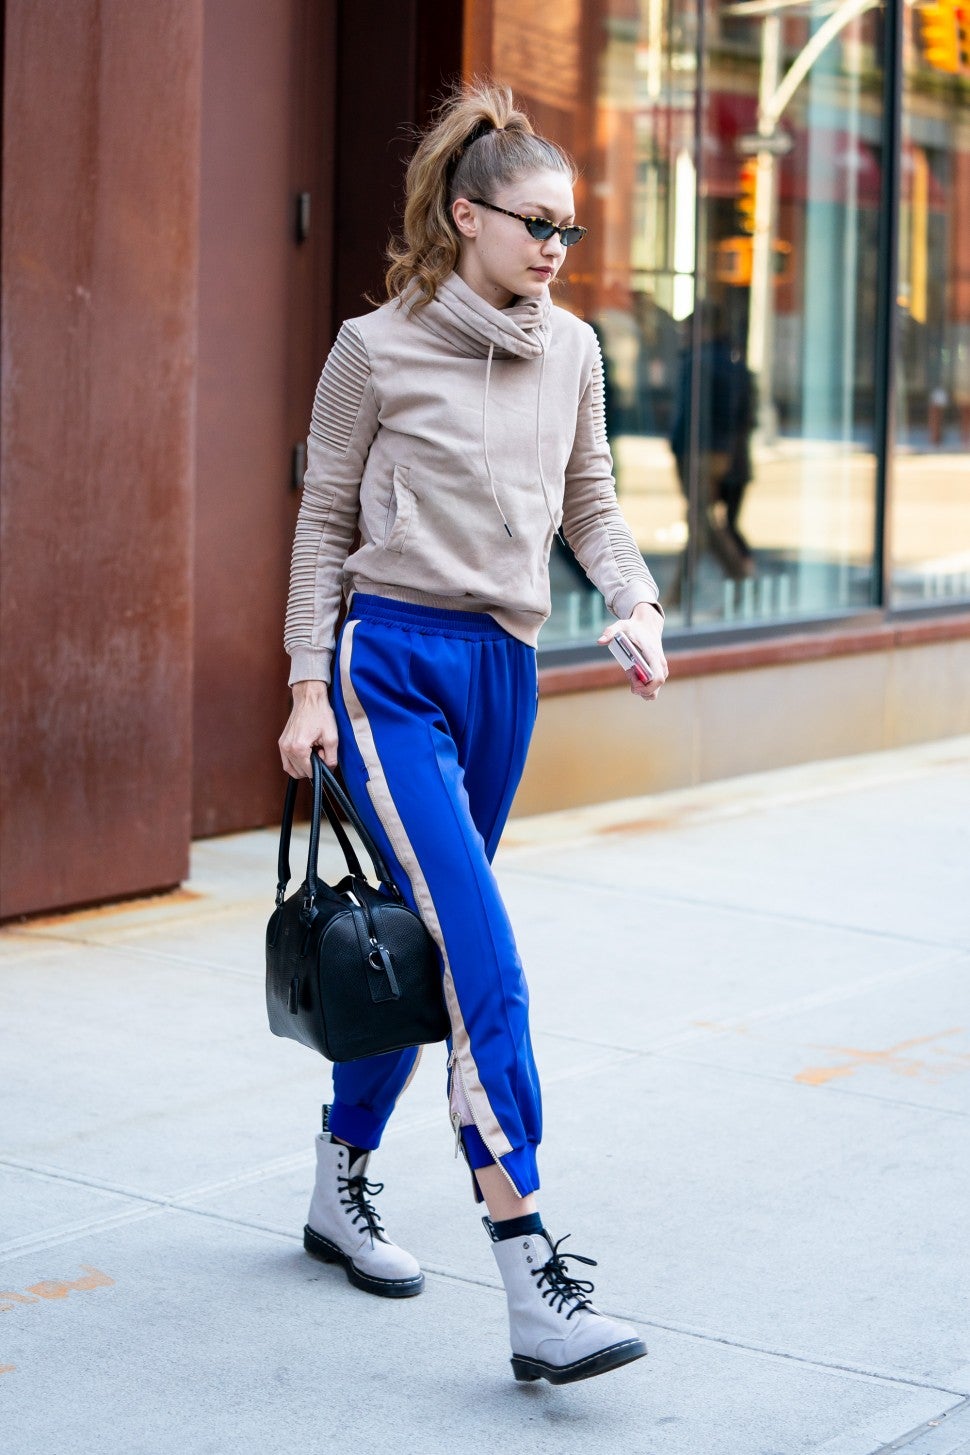 Gigi Hadid in blue sweatpants and lace-up boots